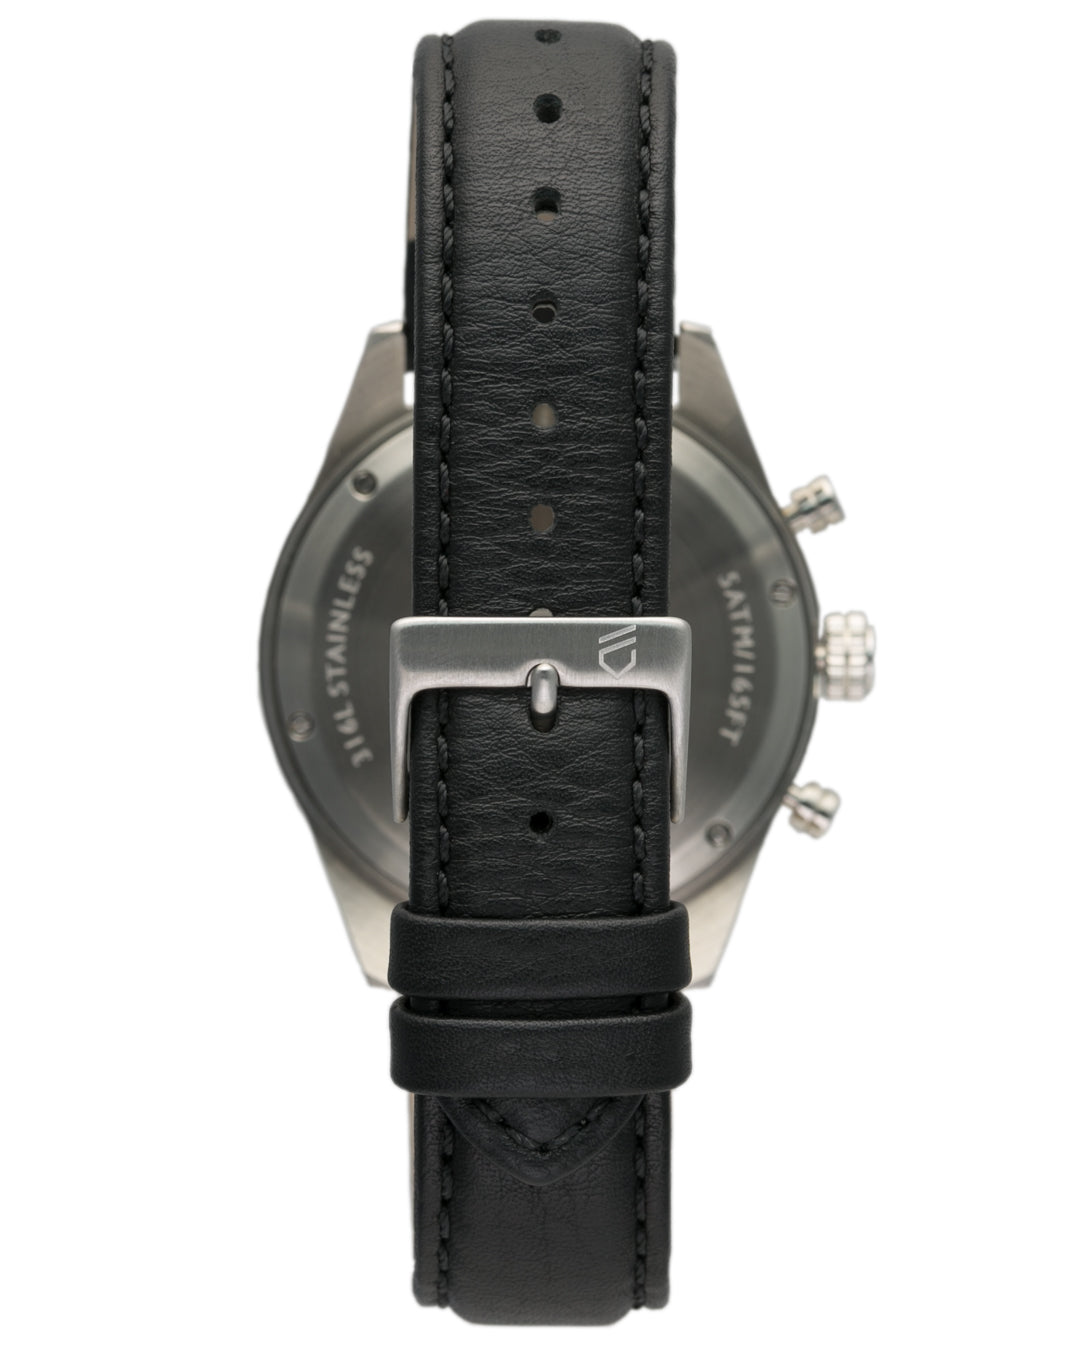 Italian leather watch strap with black engraved buckle